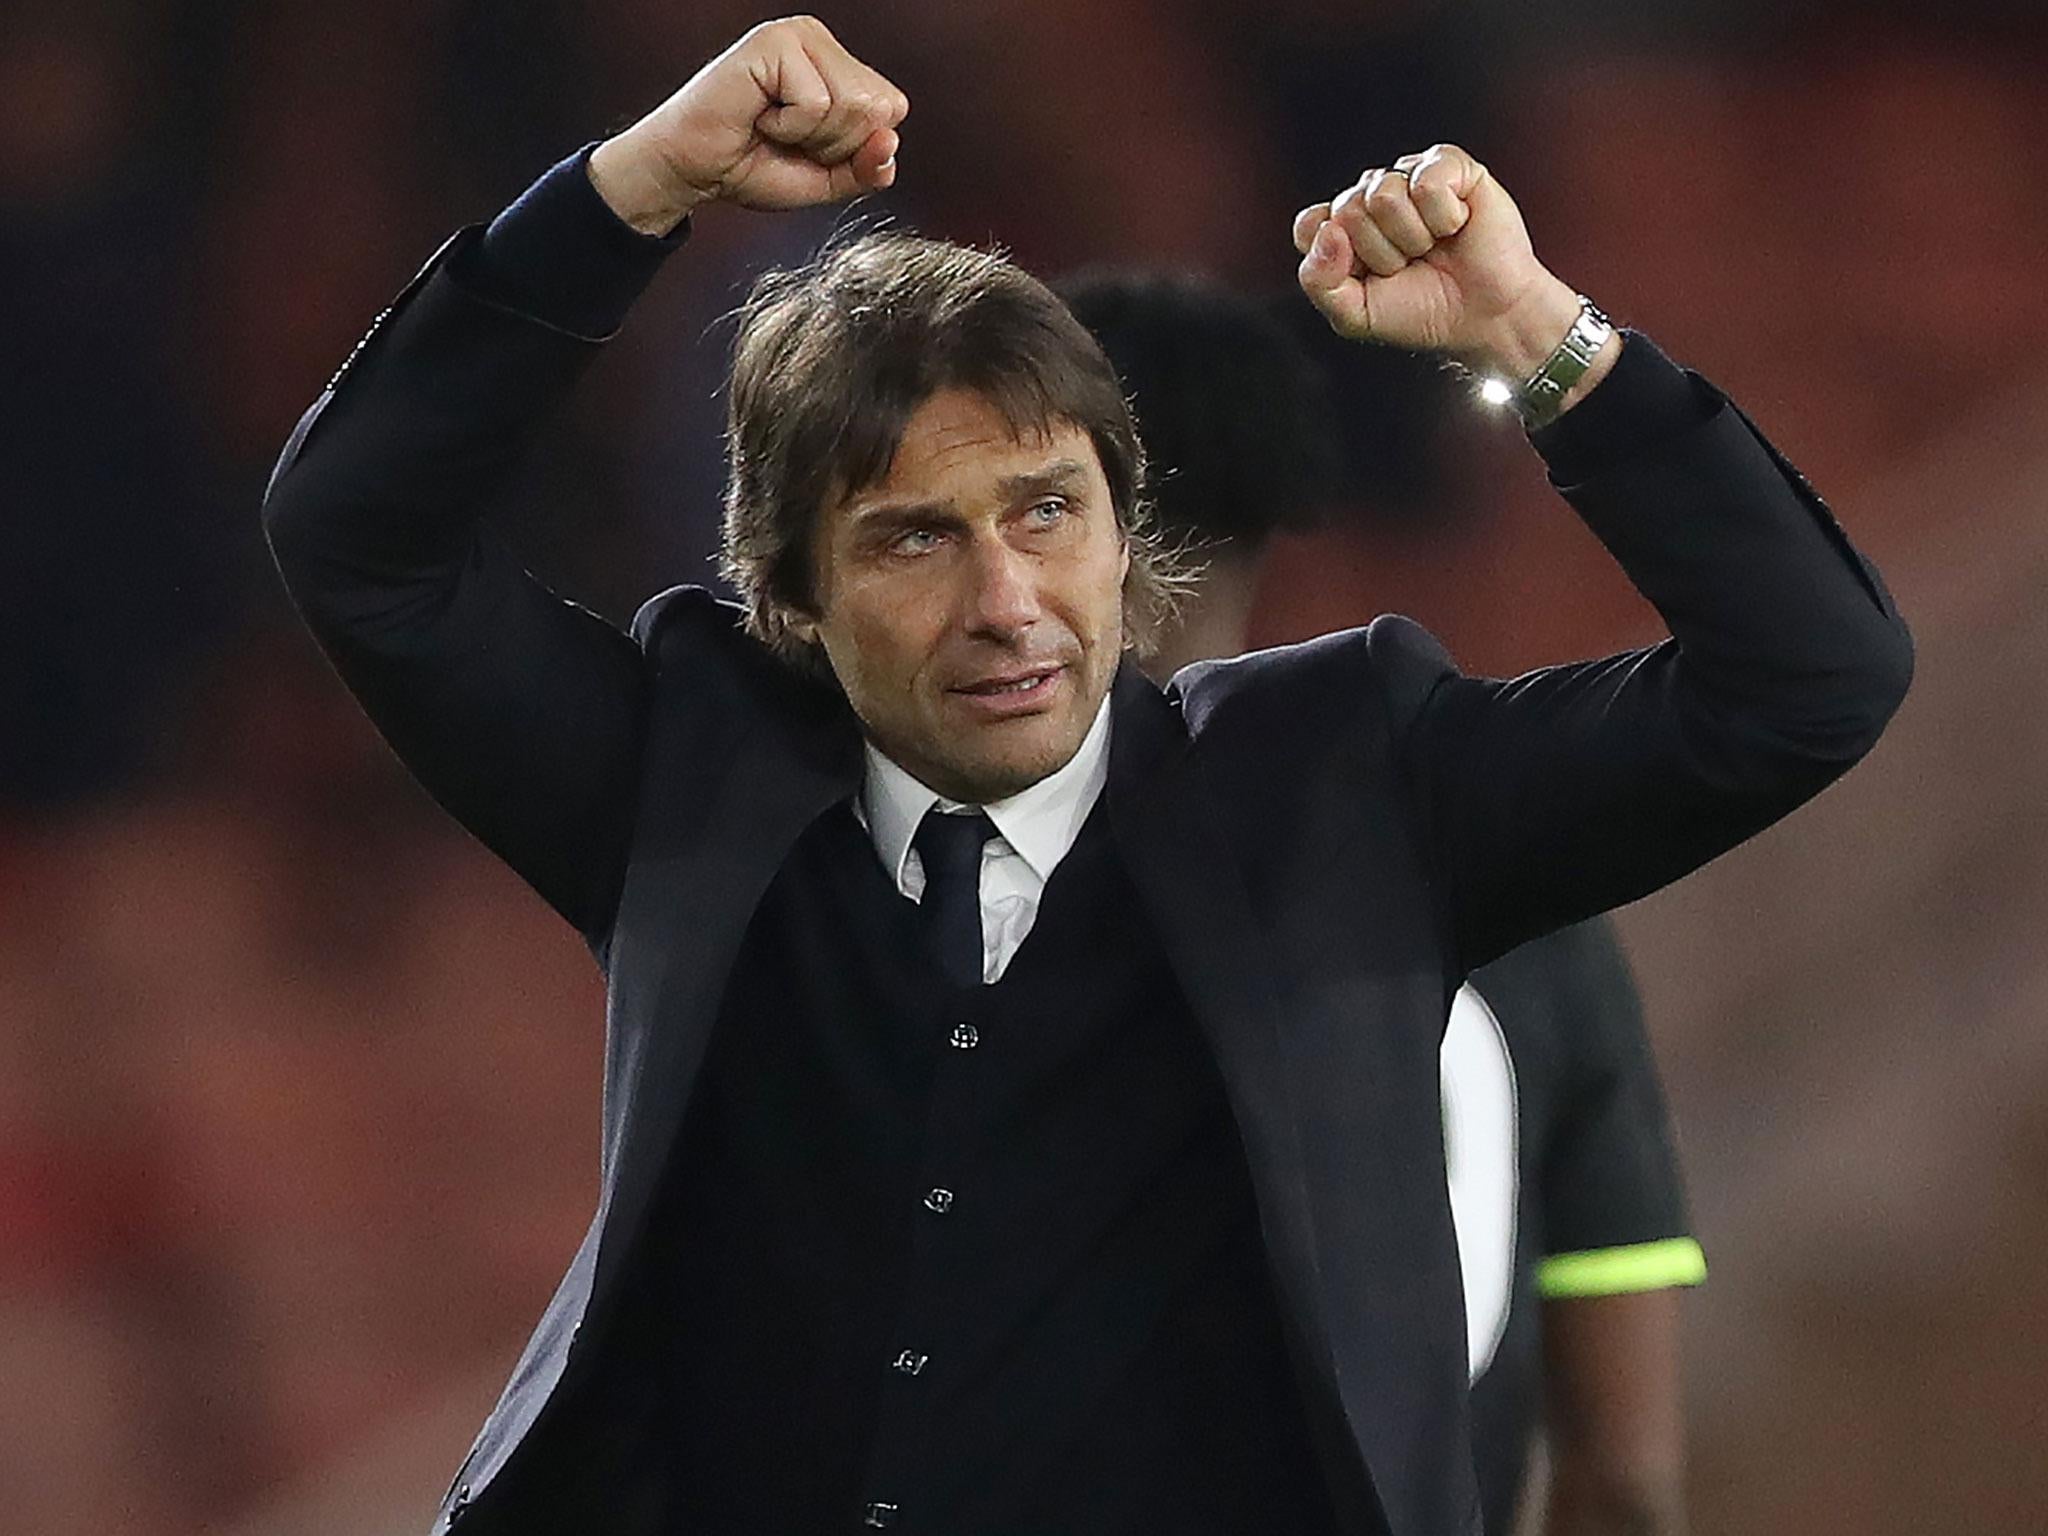 Conte understands that balance is vital to any team pursuing Premier League glory